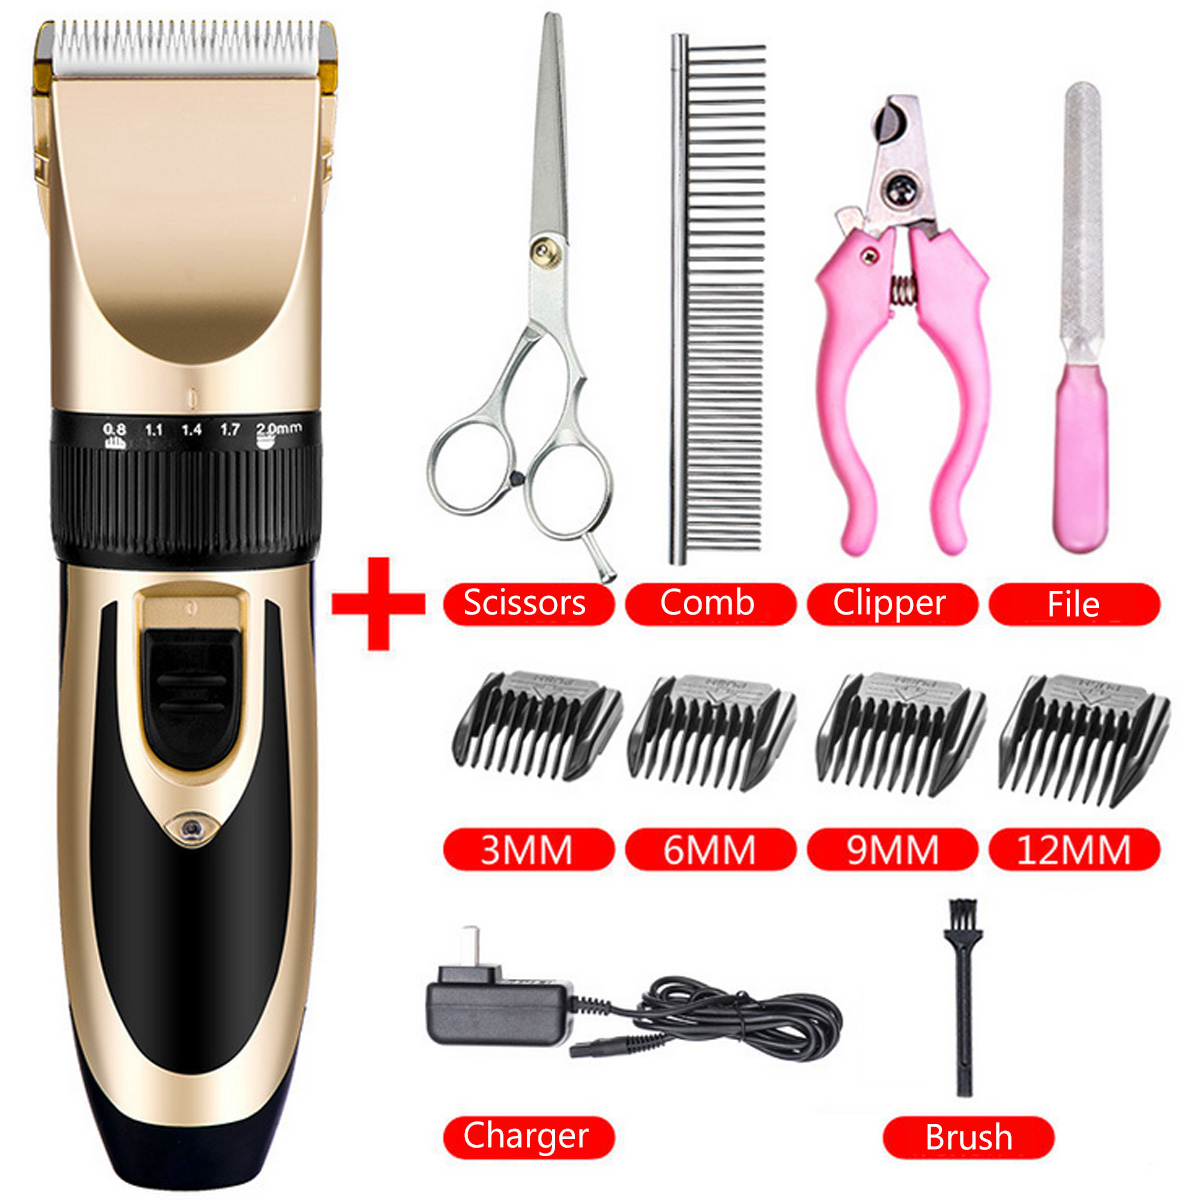 Automatic Comb And Best Shaver Hair Clipper Powered by battery Yalatan Dog Grooming Clipper not including Small Sizes Pet Fur Grooming Tool Electric Hair Trimmer